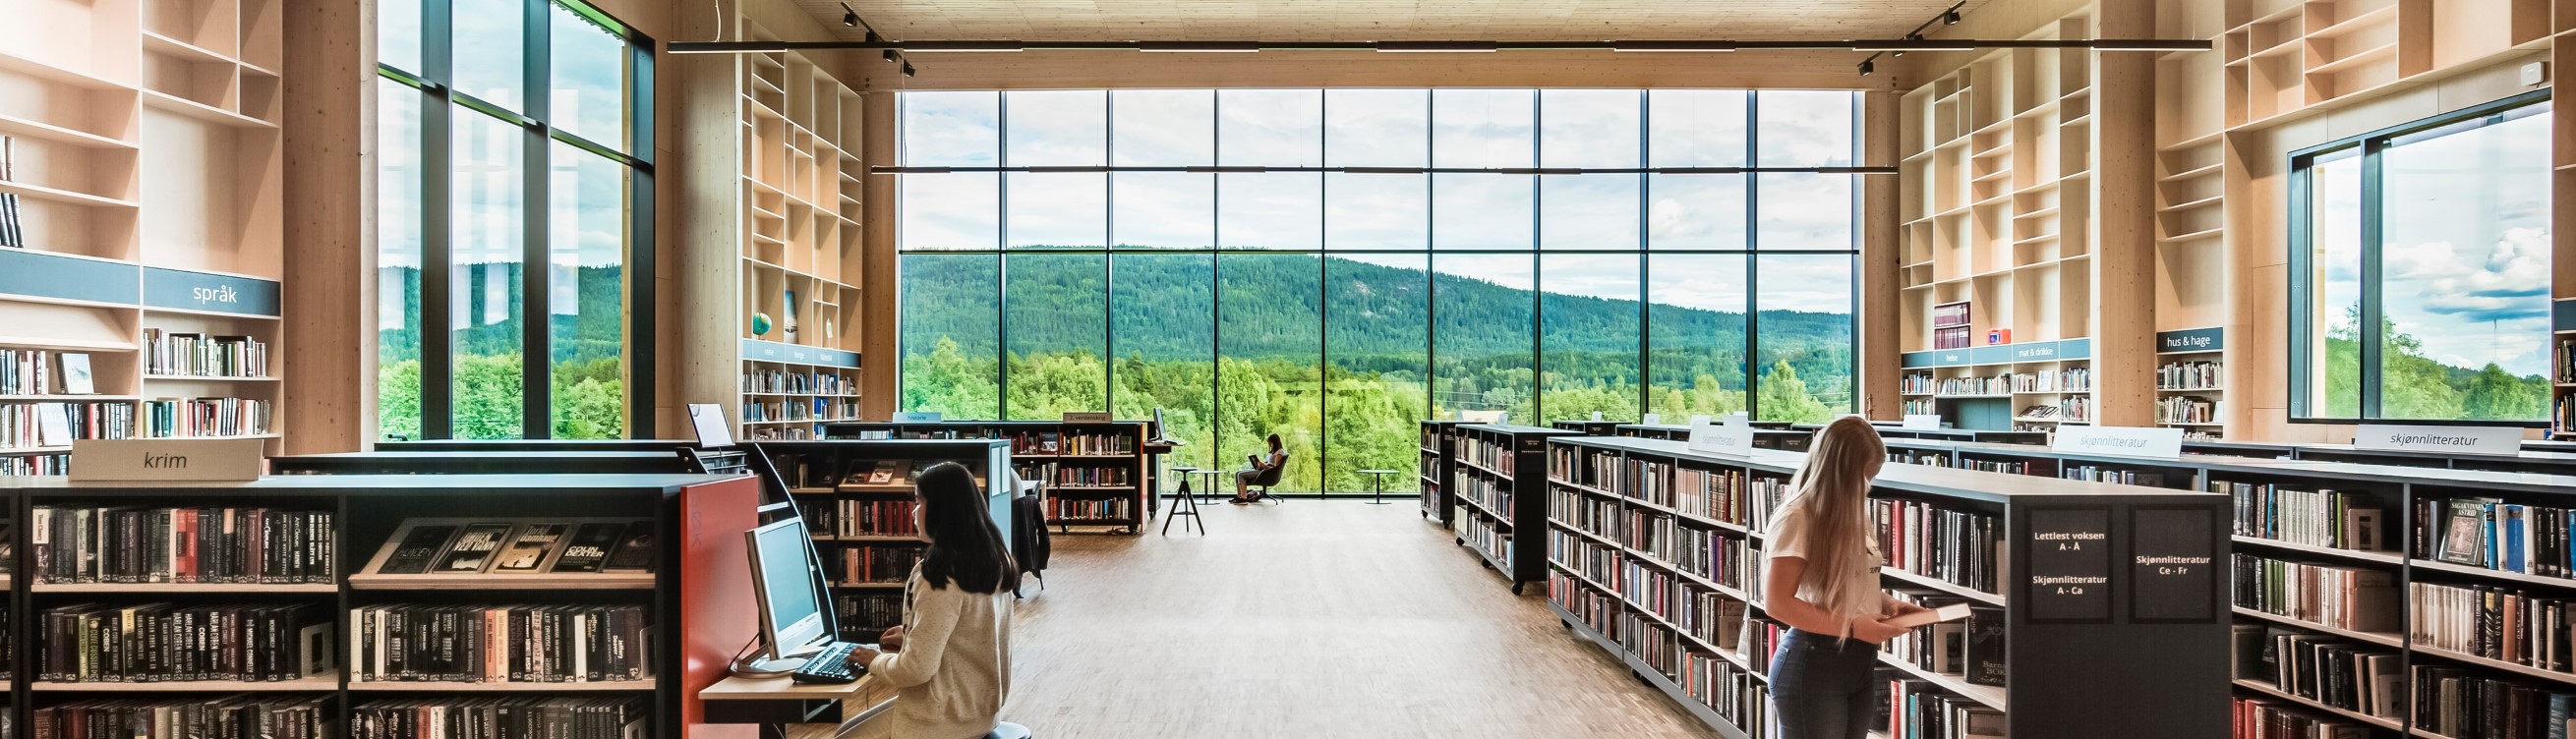 SAPA aluminium curtain walling and windows in a library, bringing light into the room and onto the books, and the landscape beyond